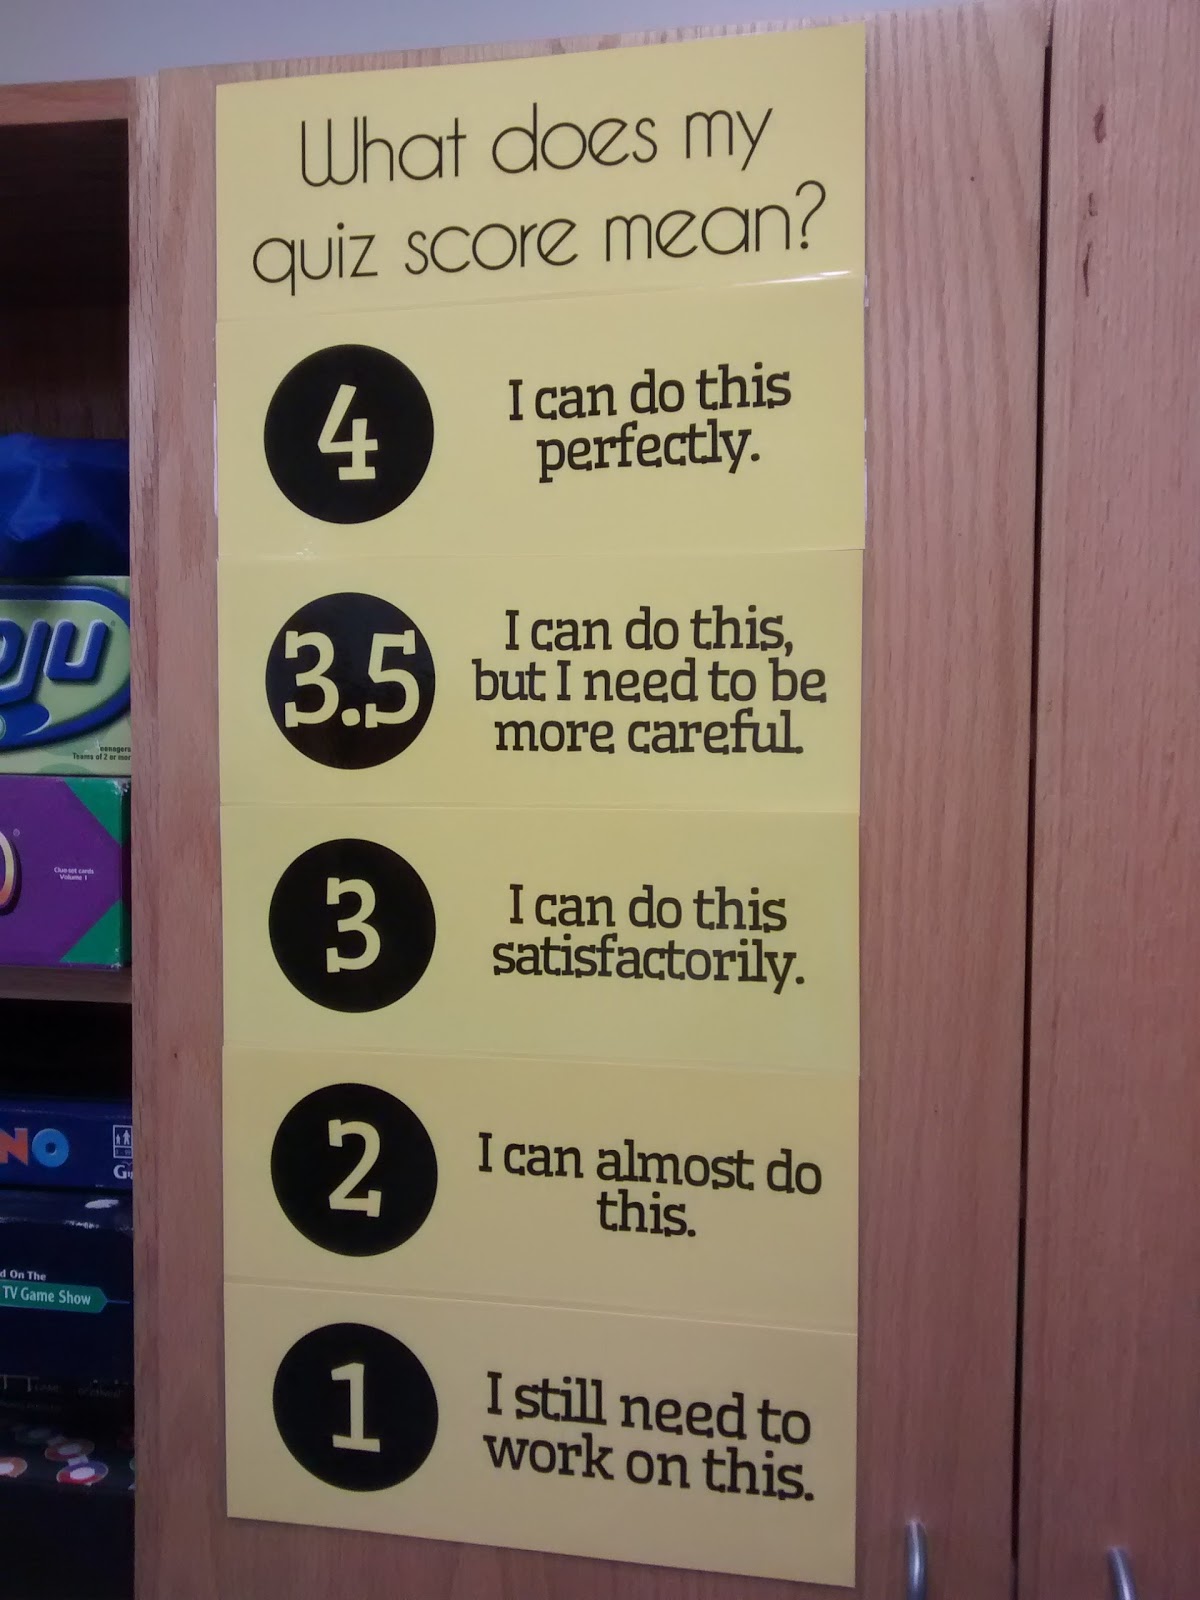 SBG Posters - What does my quiz score mean - Standards Based Grading